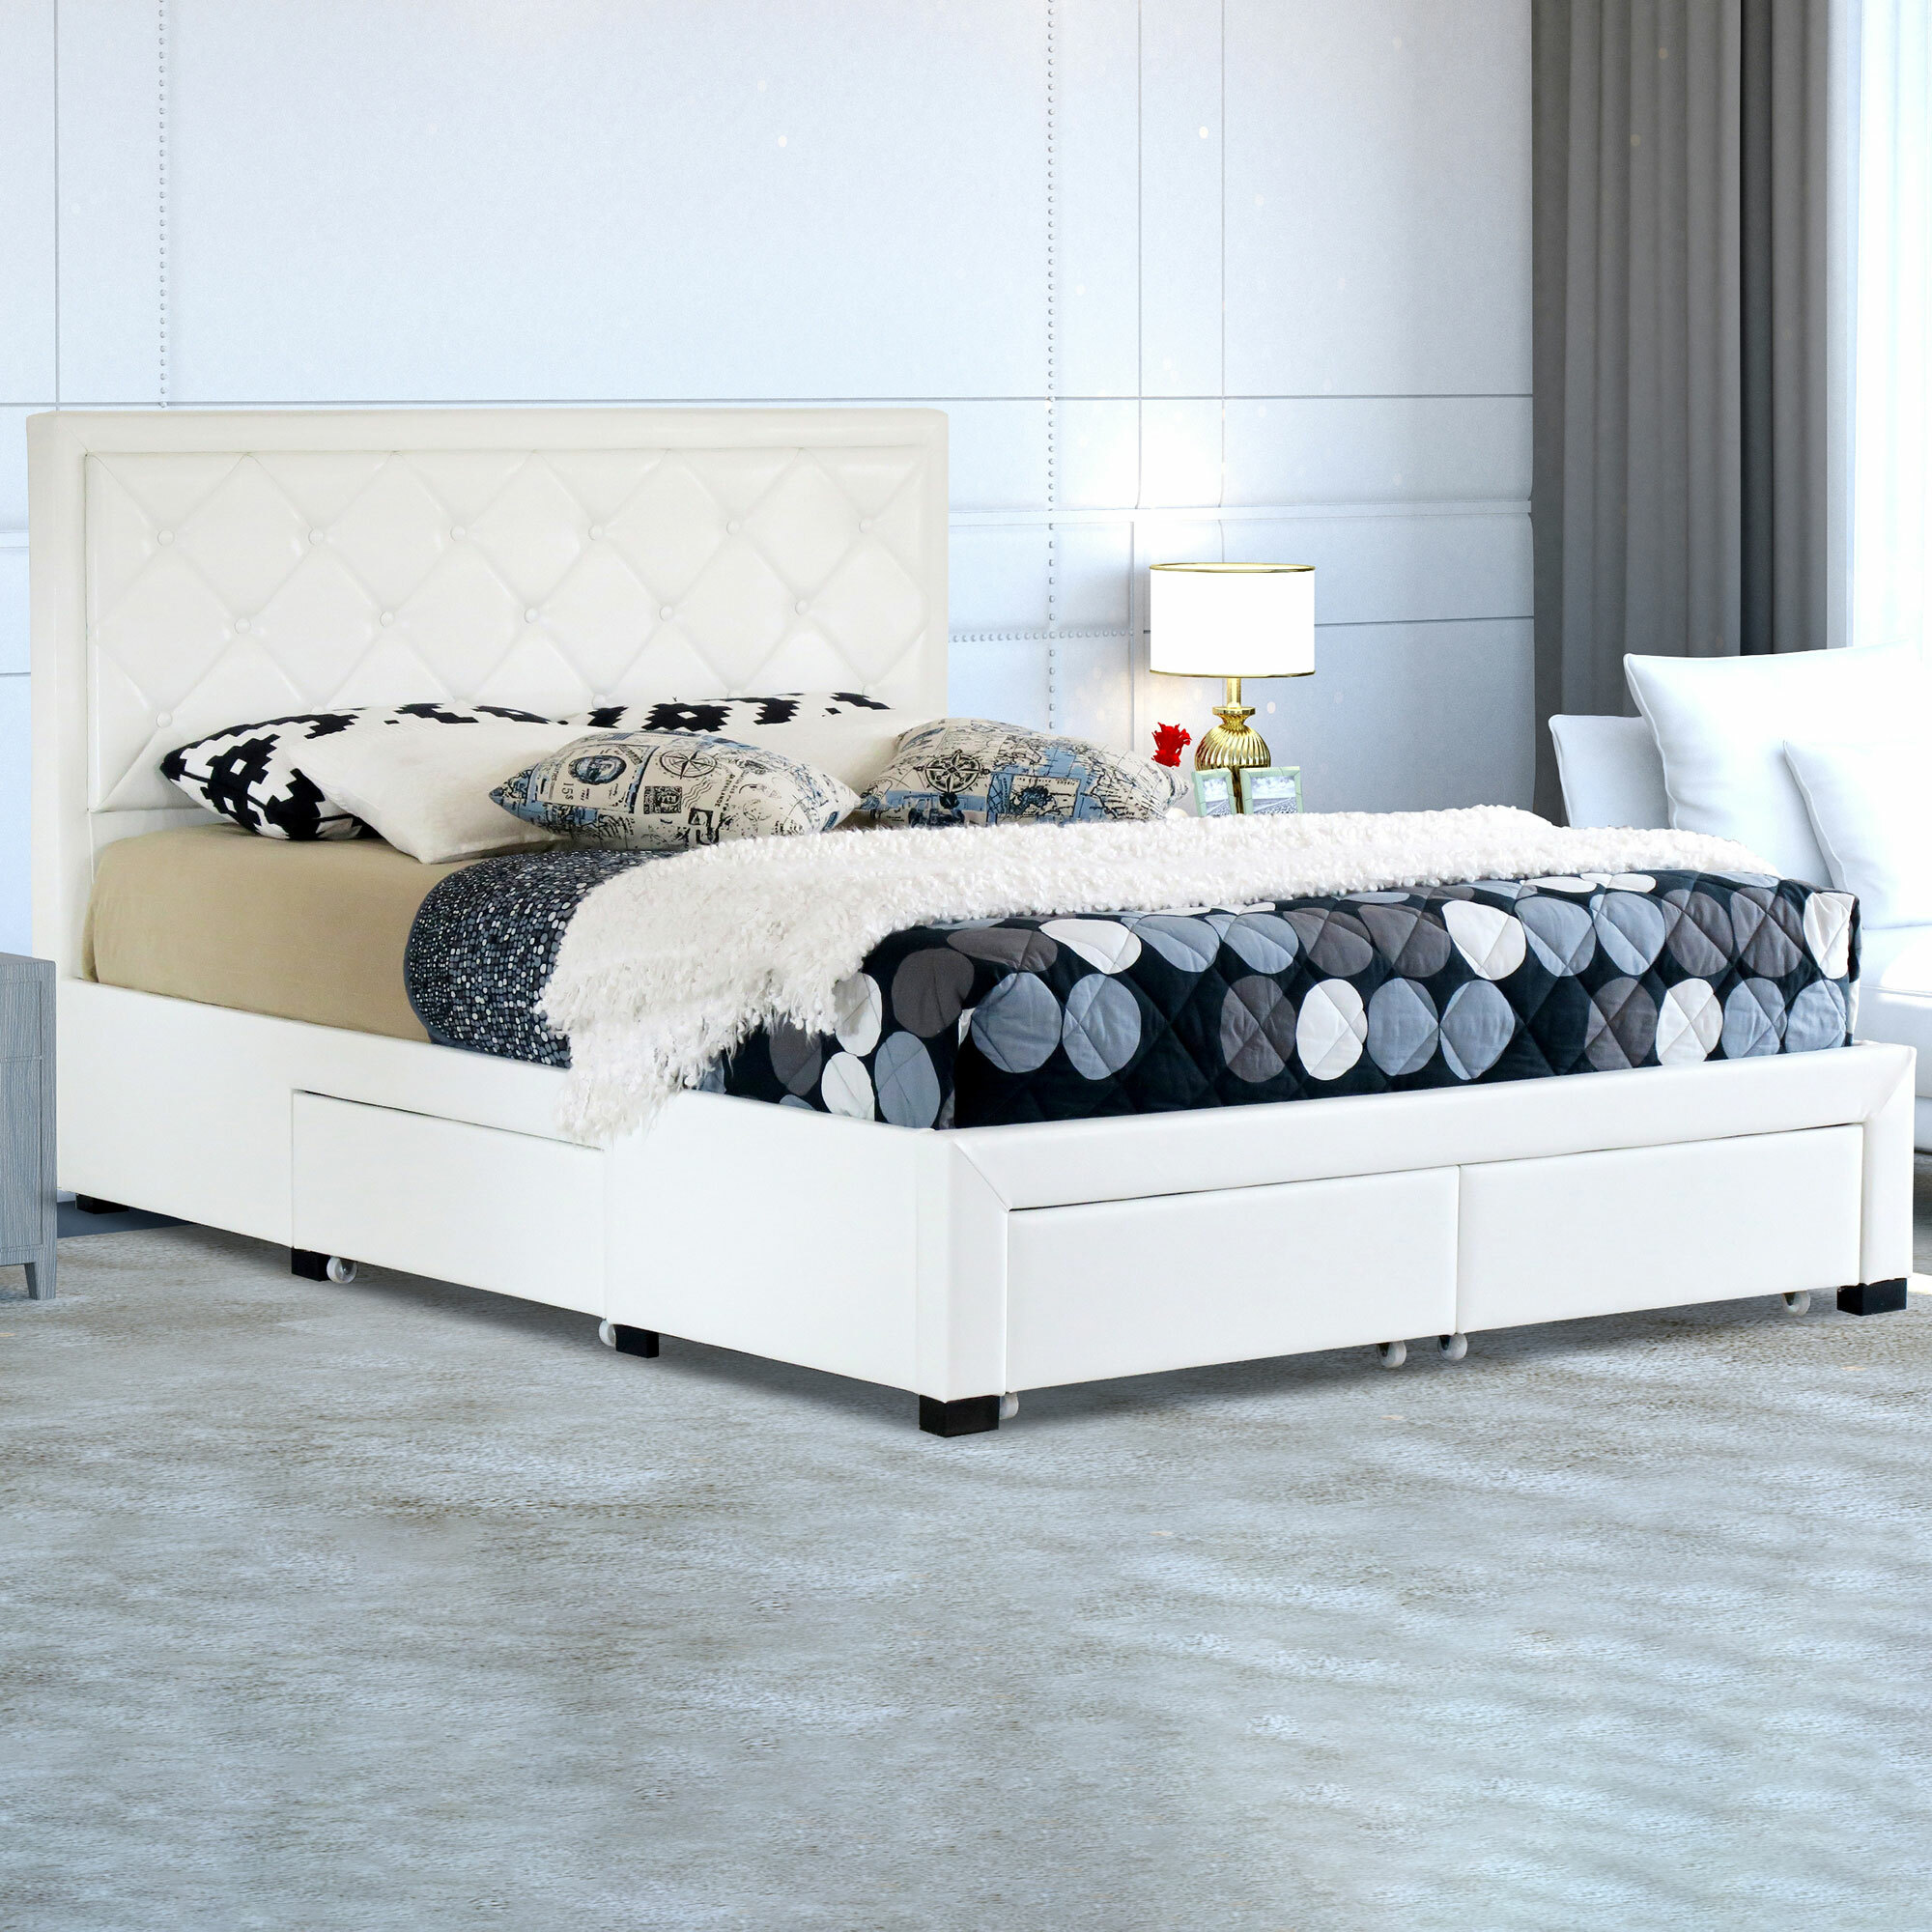 Faux Leather Bed Frame With Storage, Leather Full Bed